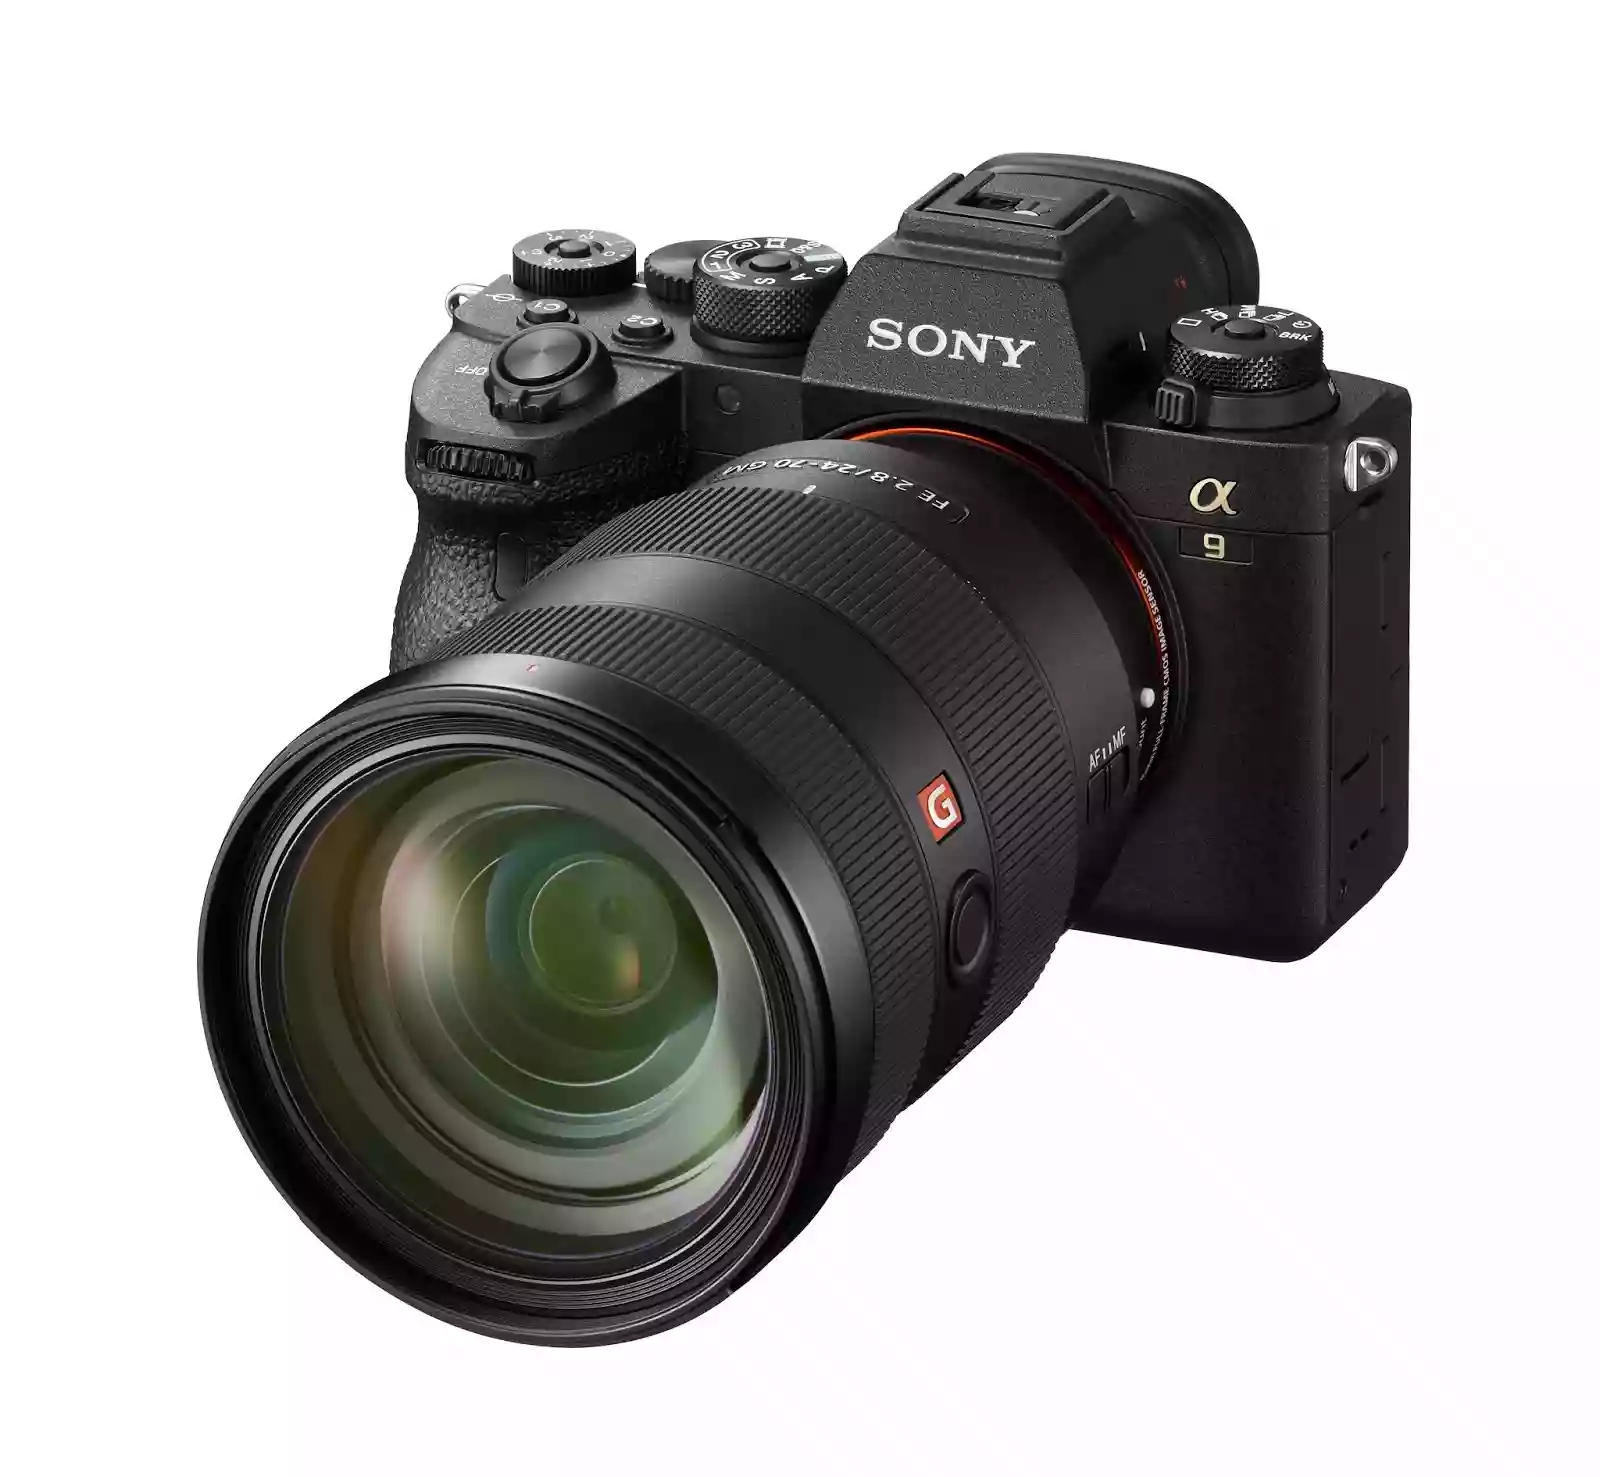 The New Sony A9 II